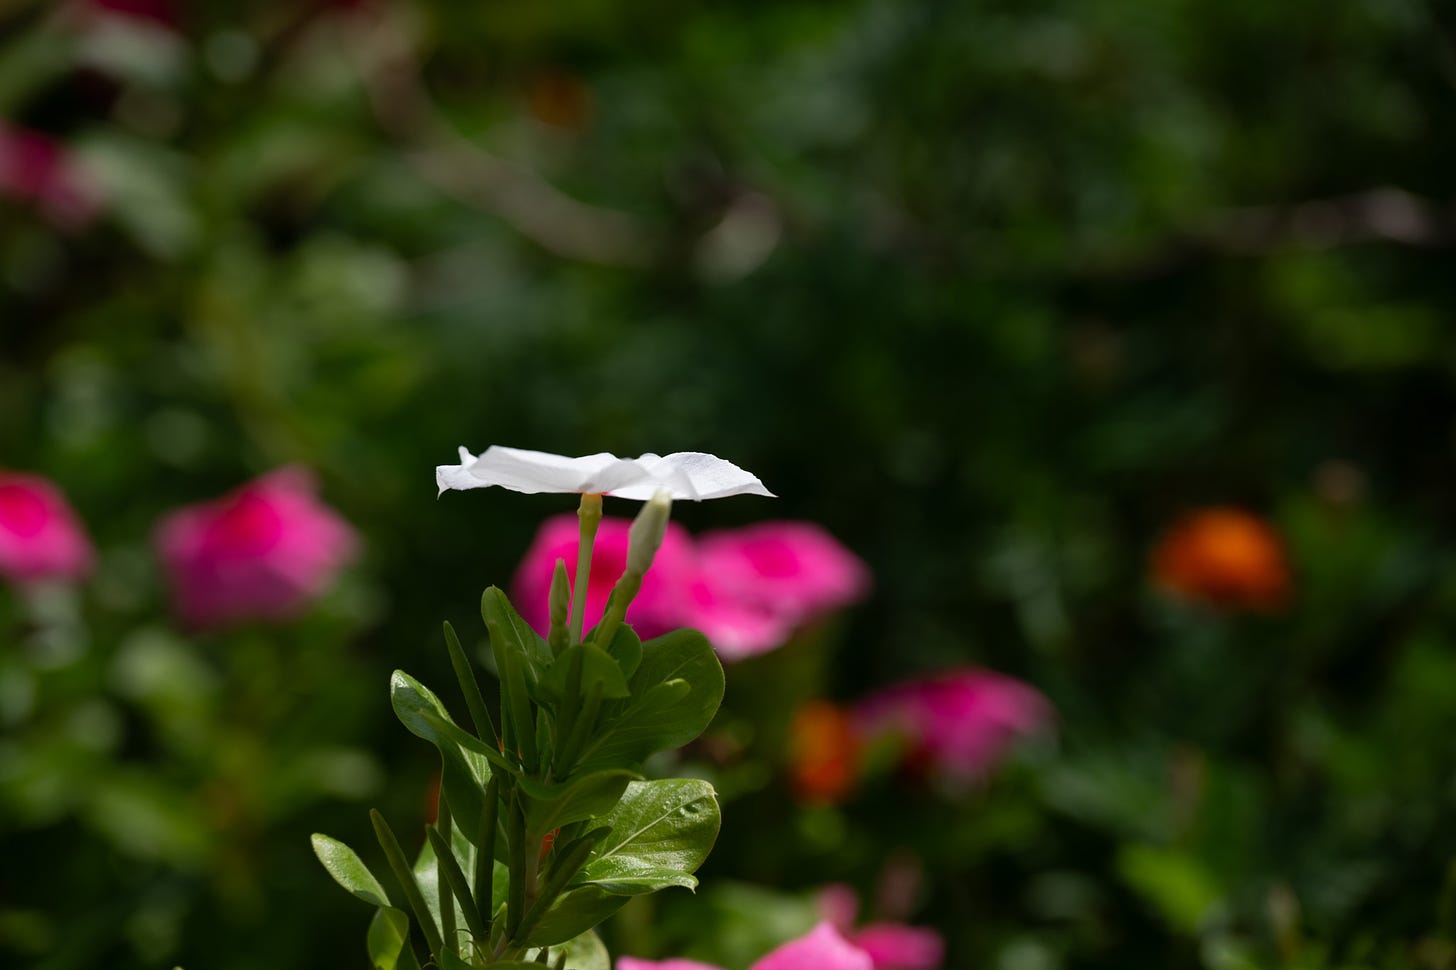 A side view of a white vinca with pink vinca blooms and leaves blurred in the background